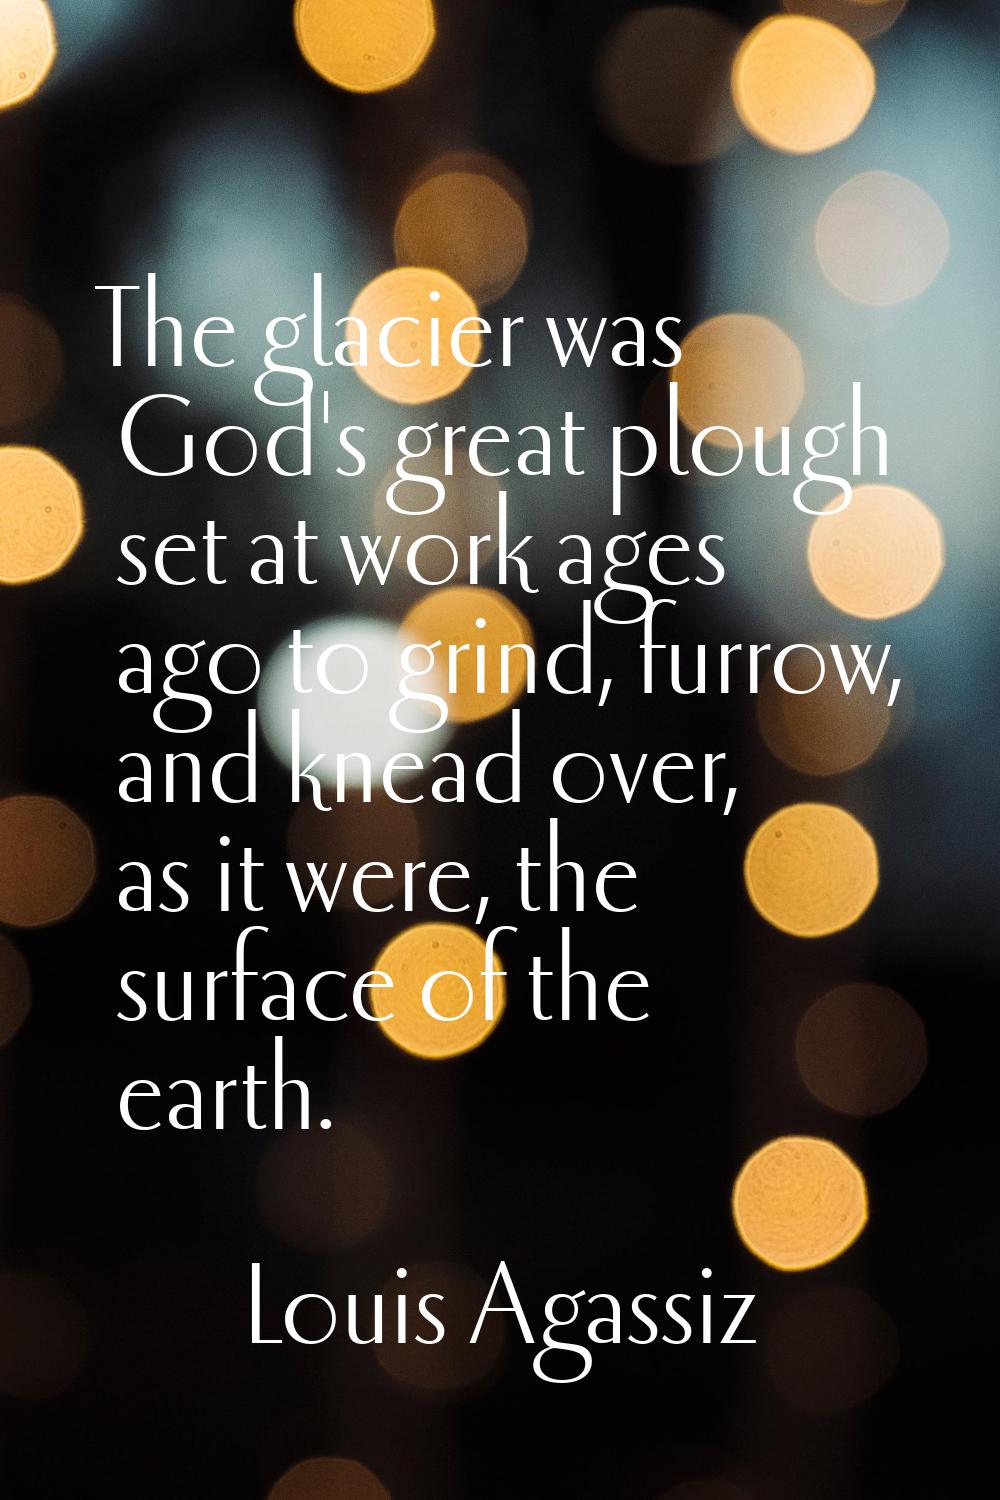 The glacier was God's great plough set at work ages ago to grind, furrow, and knead over, as it wer